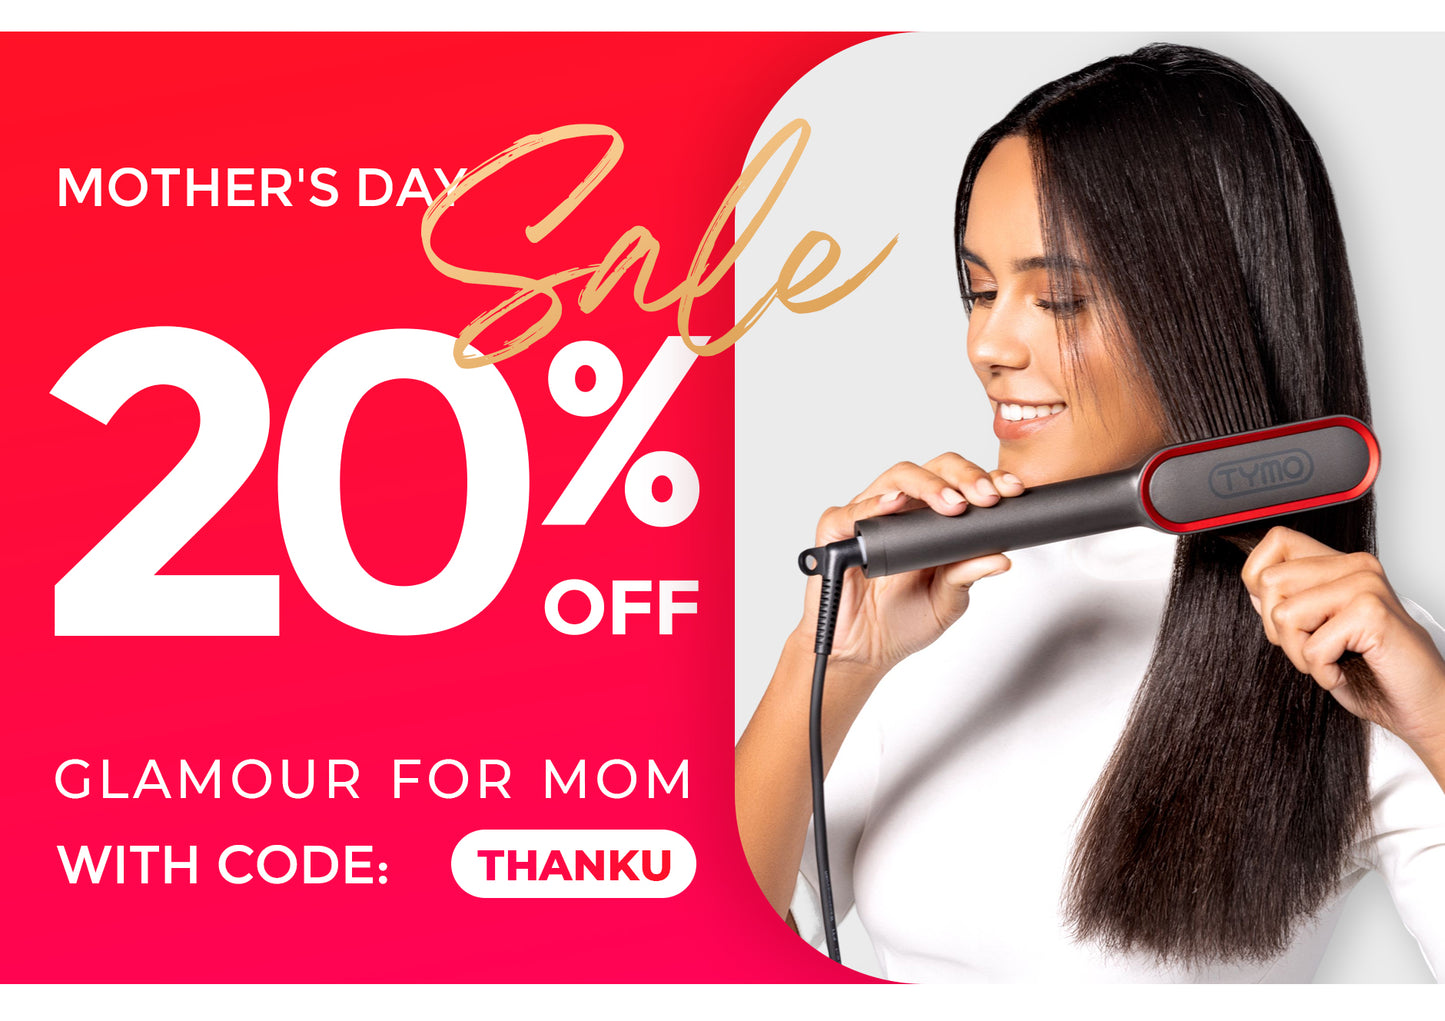 MOTHER'S DAY SALE GLAMOUR FOR MOM WITH CODE THANKU